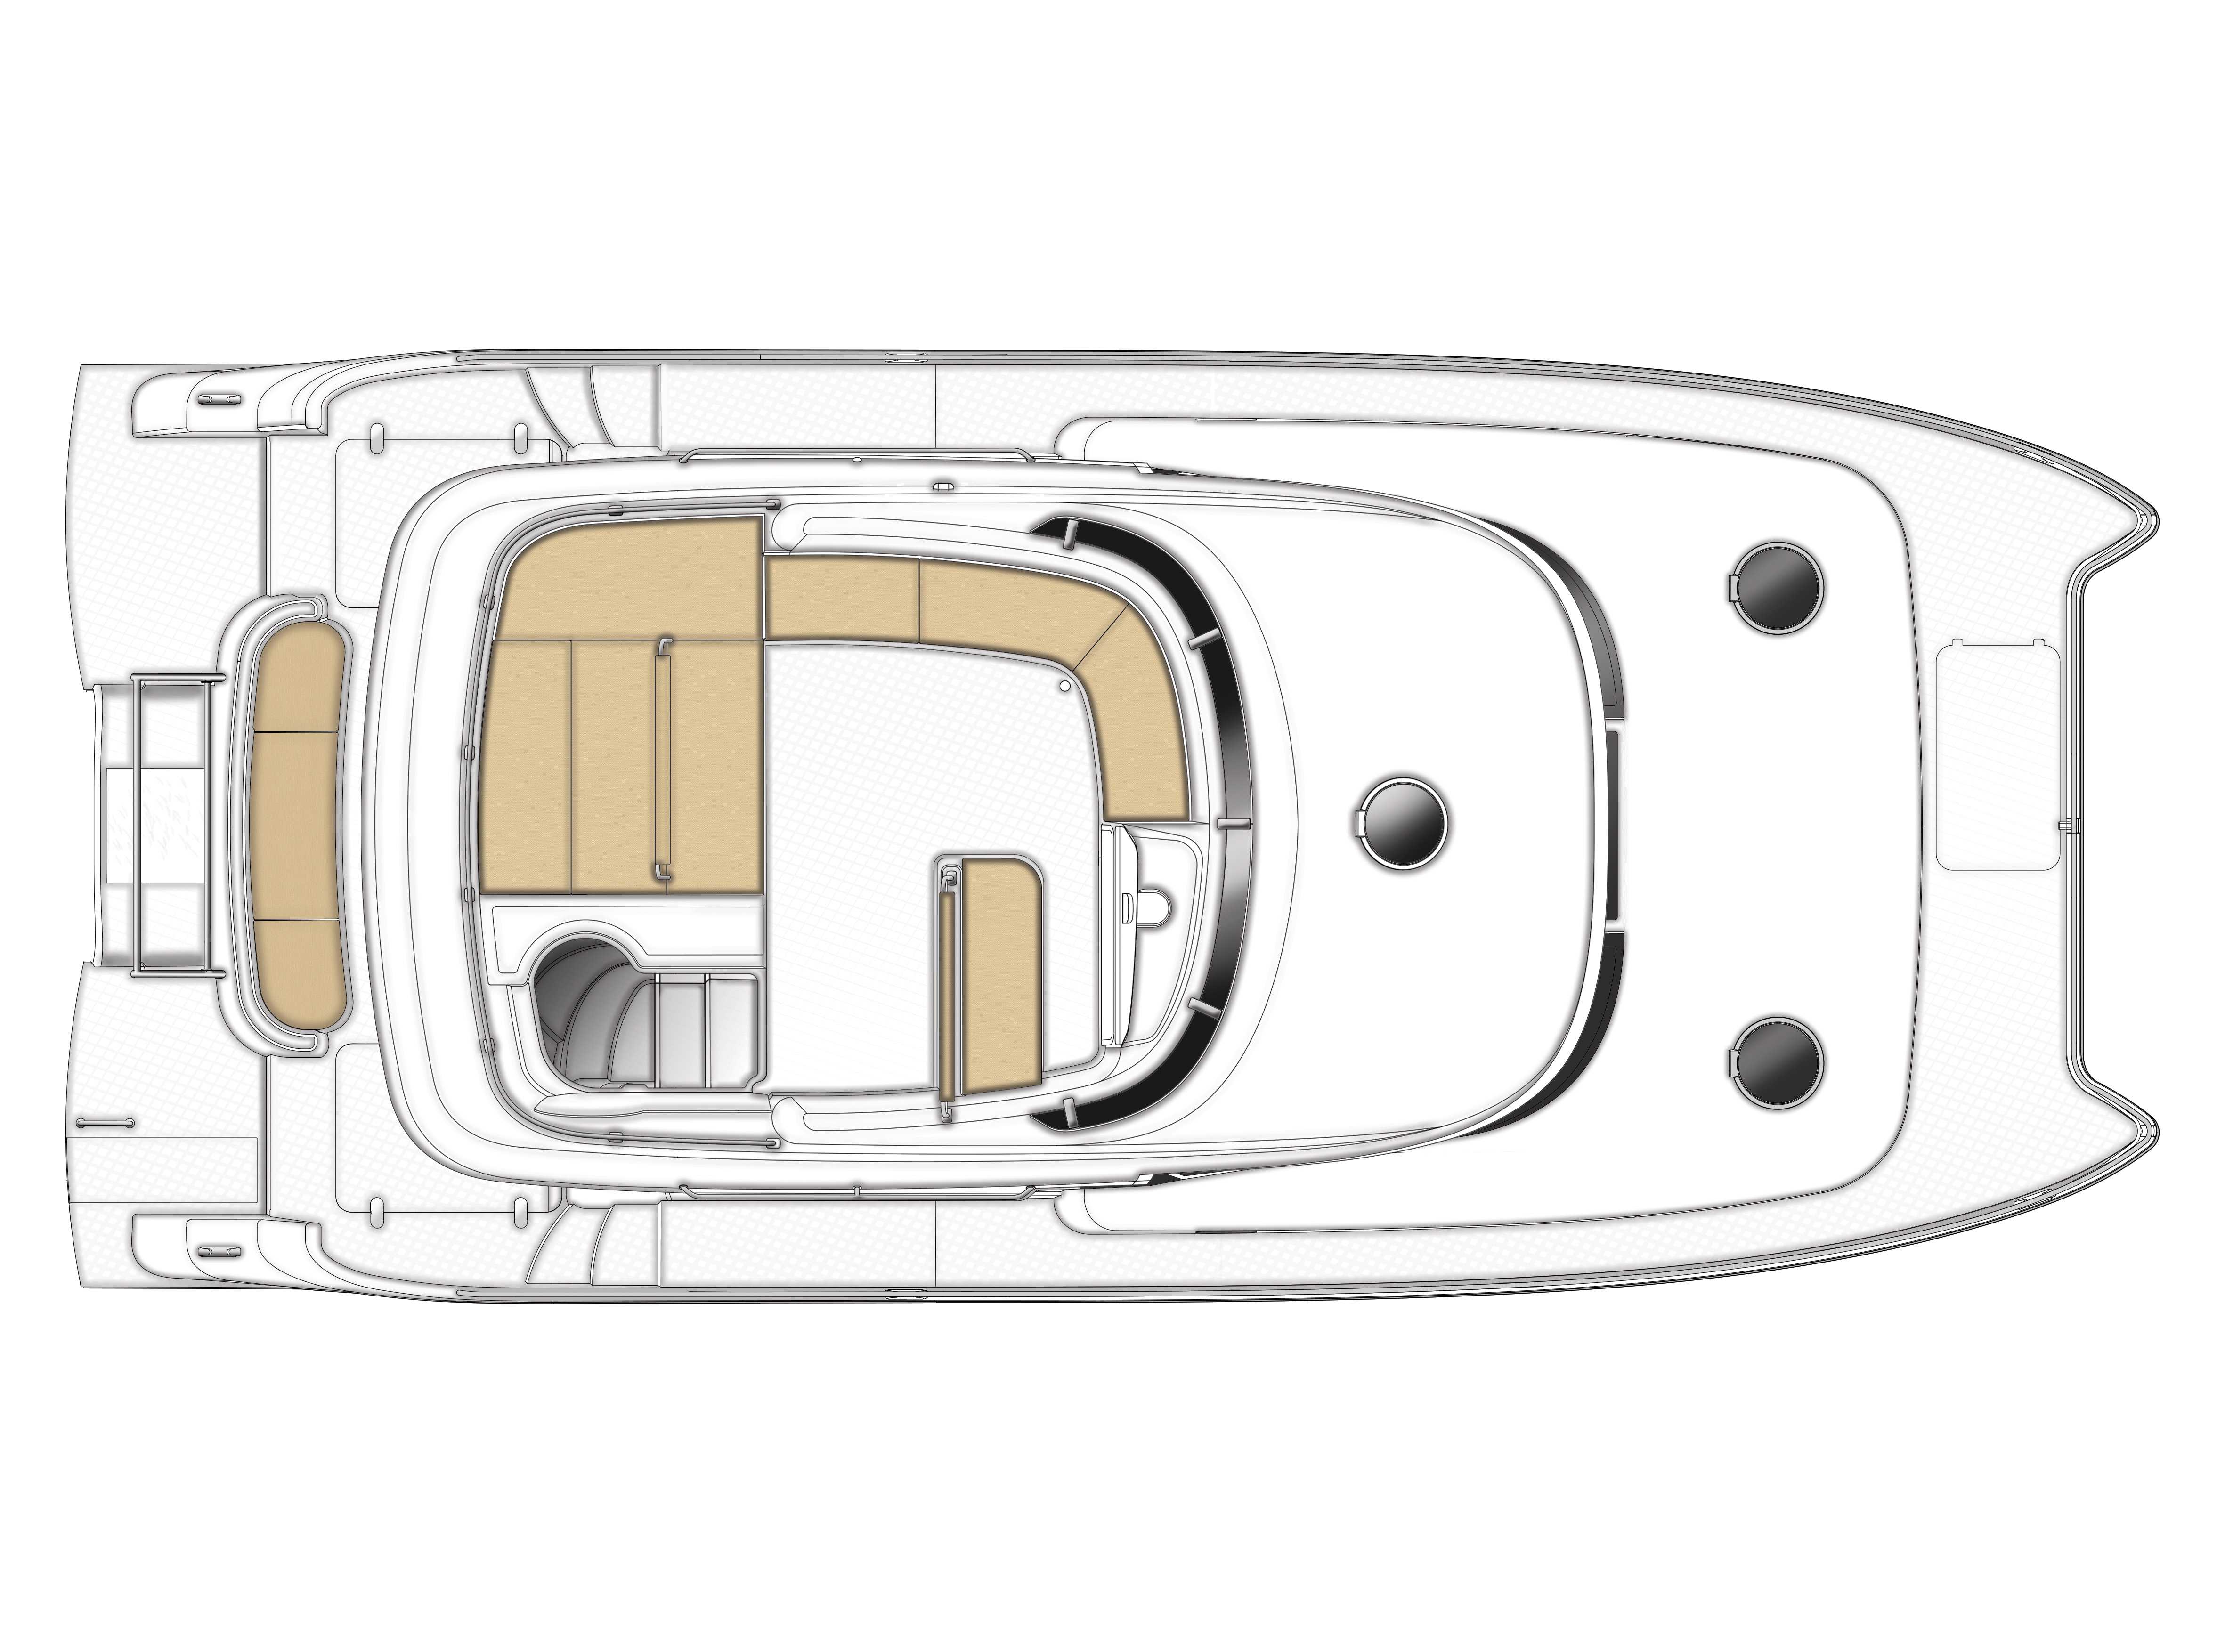 Fountaine Pajot Motor Yacht  SUMMERLAND 40 LC